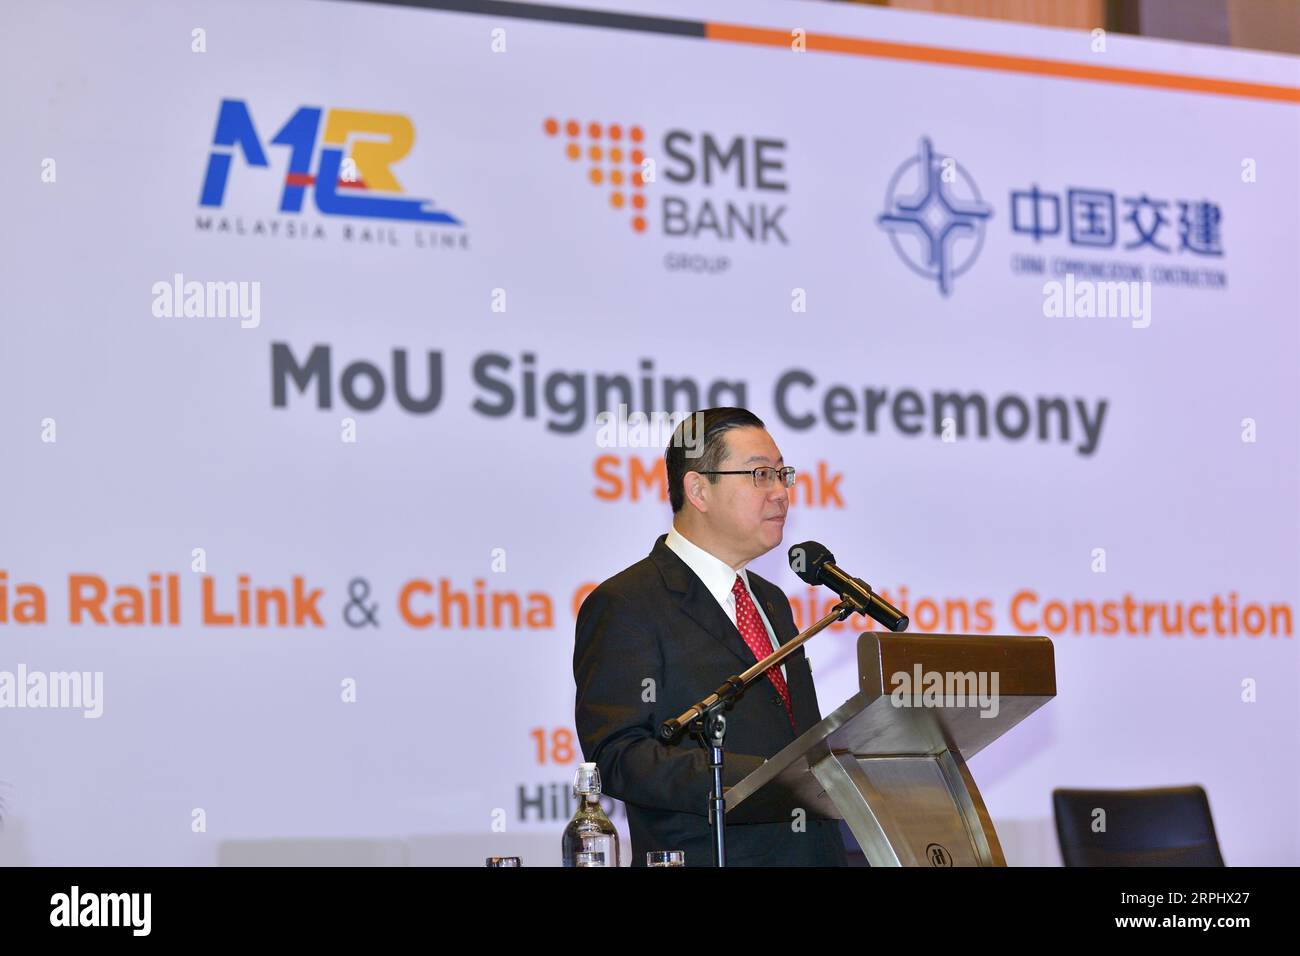 191118 -- KUALA LUMPUR, Nov. 18, 2019 Xinhua -- Malaysian Finance Minister Lim Guan Eng speaks at a memorandum of understanding MoU signing ceremony in Kuala Lumpur, Malaysia, Nov. 18, 2019. Small Medium Enterprise Development Bank Malaysia SME Bank announced on Monday to set aside 1 billion ringgit 240 million U.S. dollars specially for local contractors, which are expected to take a significant part in the East Coast Rail Link ECRL, a major infrastructure project and cooperation between Malaysia and China. The development financial institution under the Malaysia Ministry of Entrepreneur Deve Stock Photo